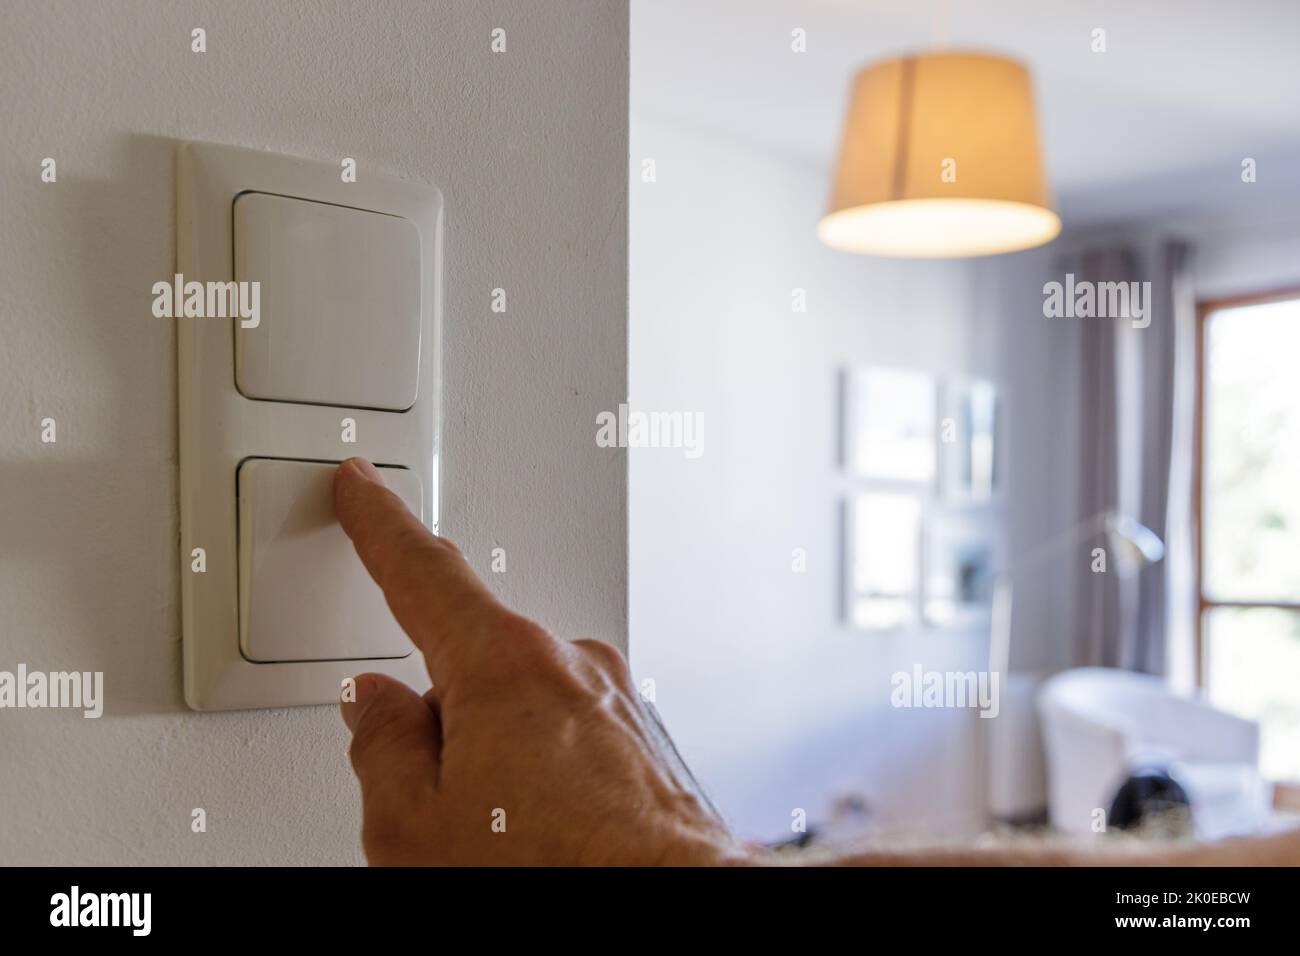 Saving energy at home, turning off the light Stock Photo